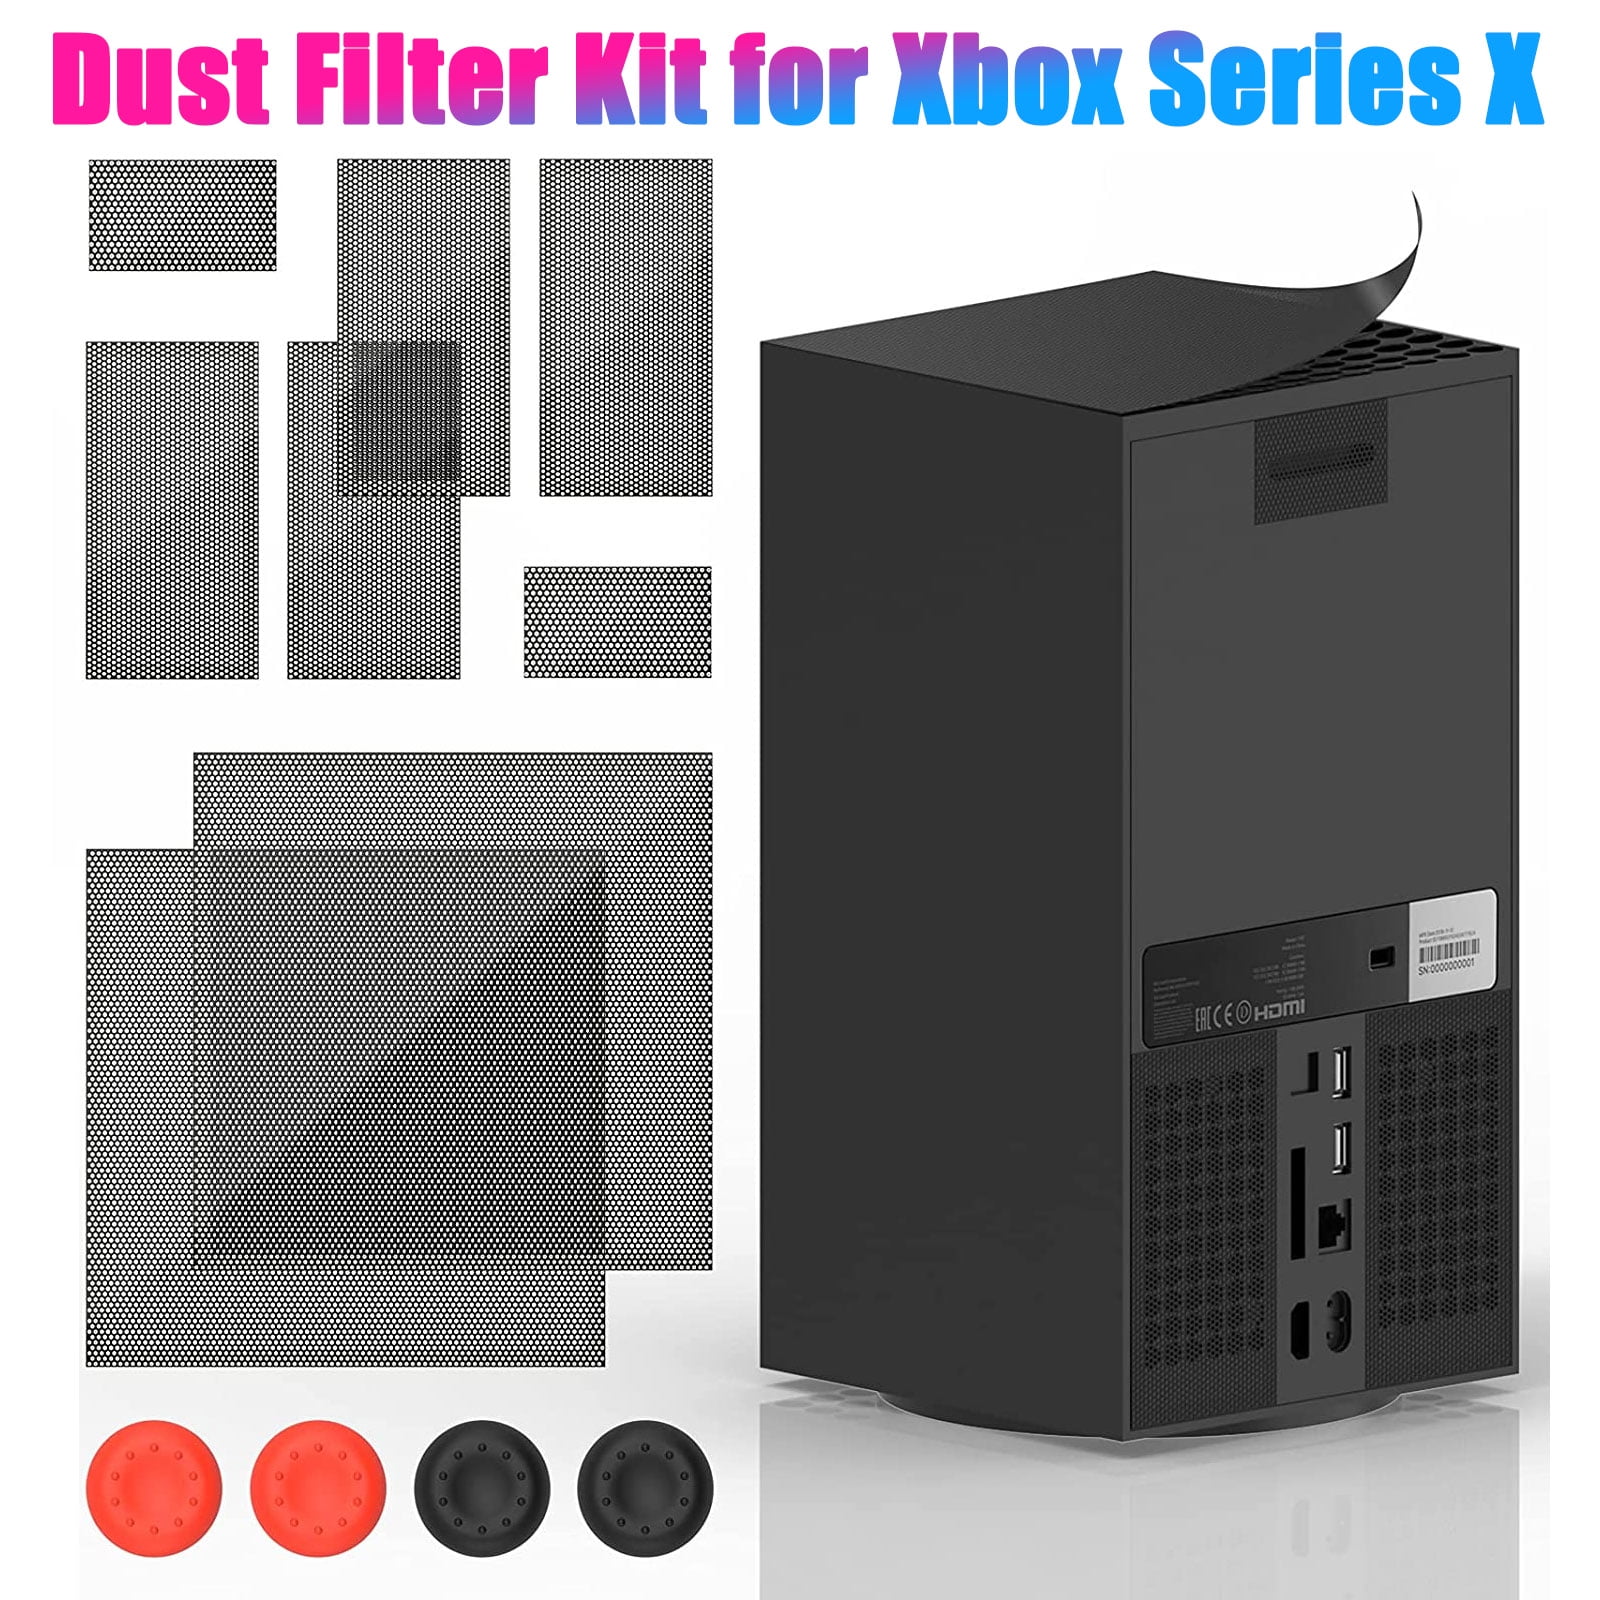 Full Protection Kit for Xbox Series X